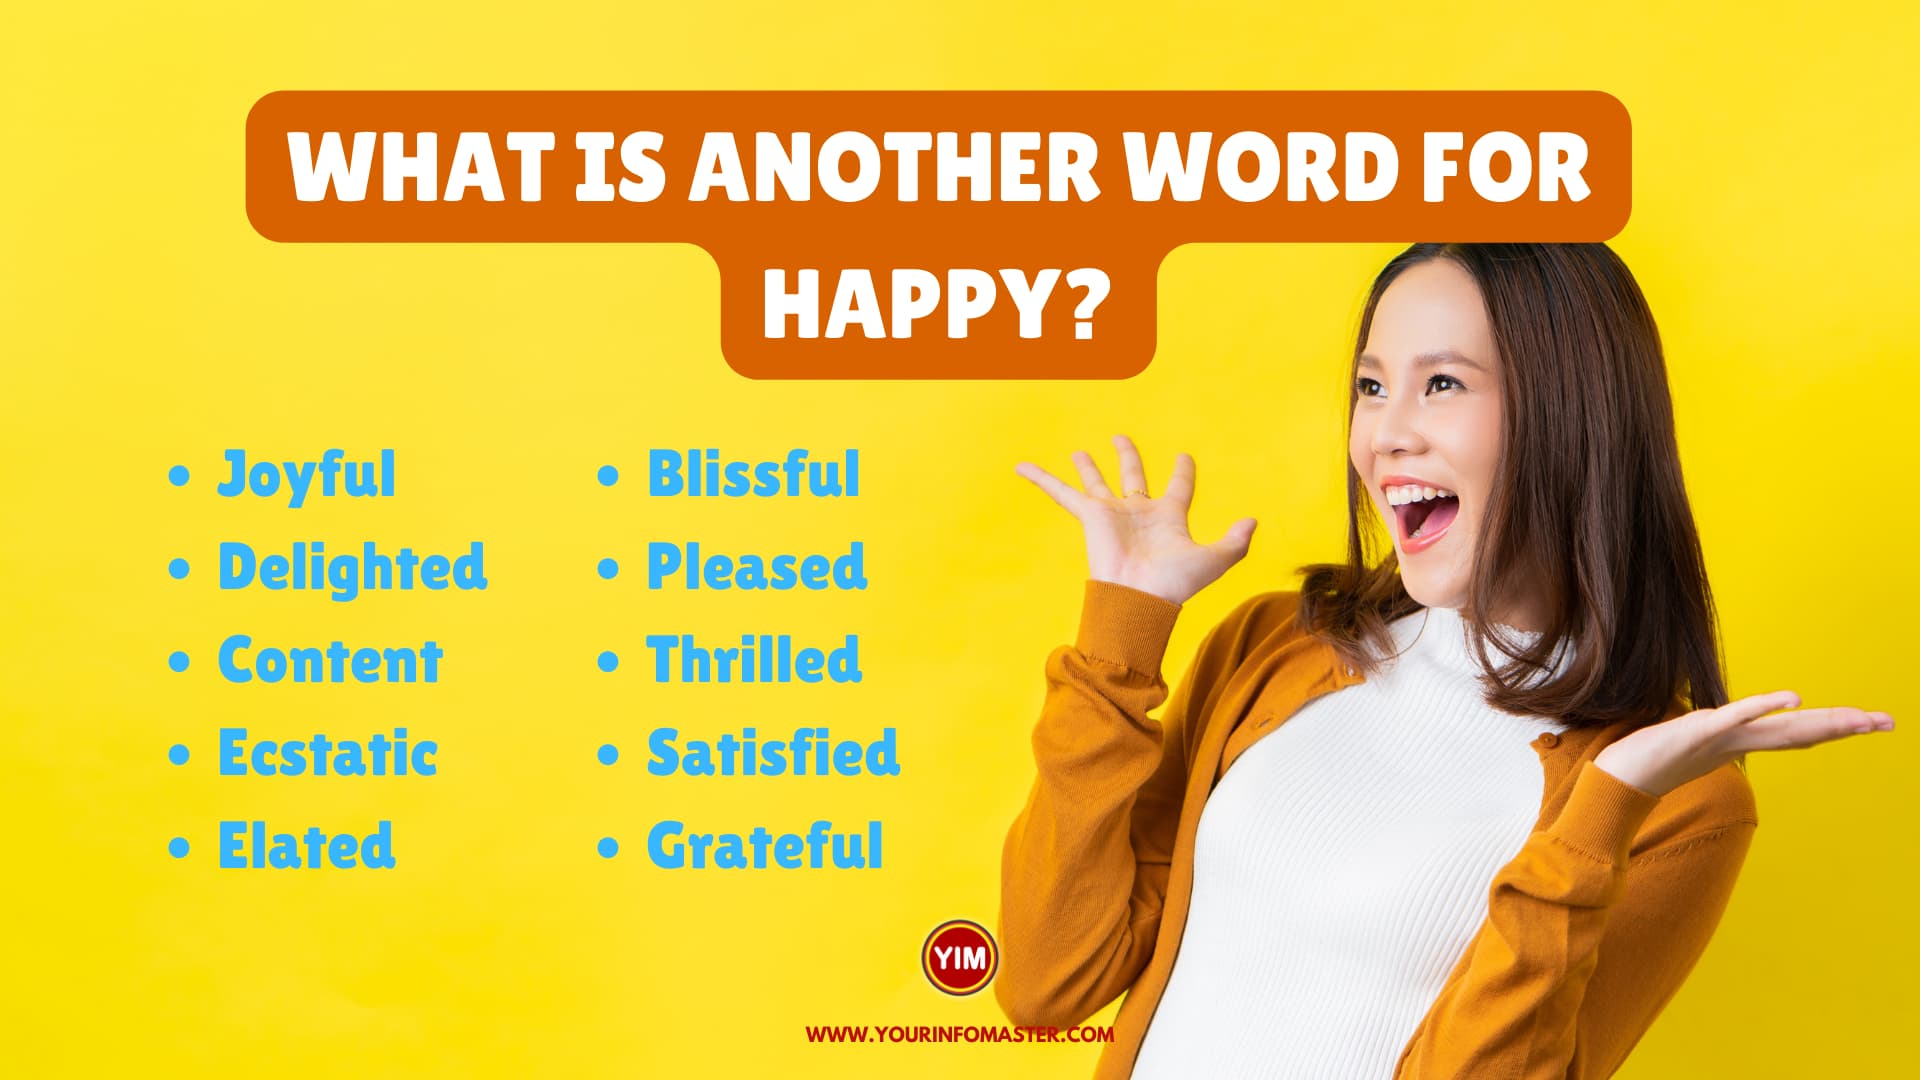 What is another word for Happy